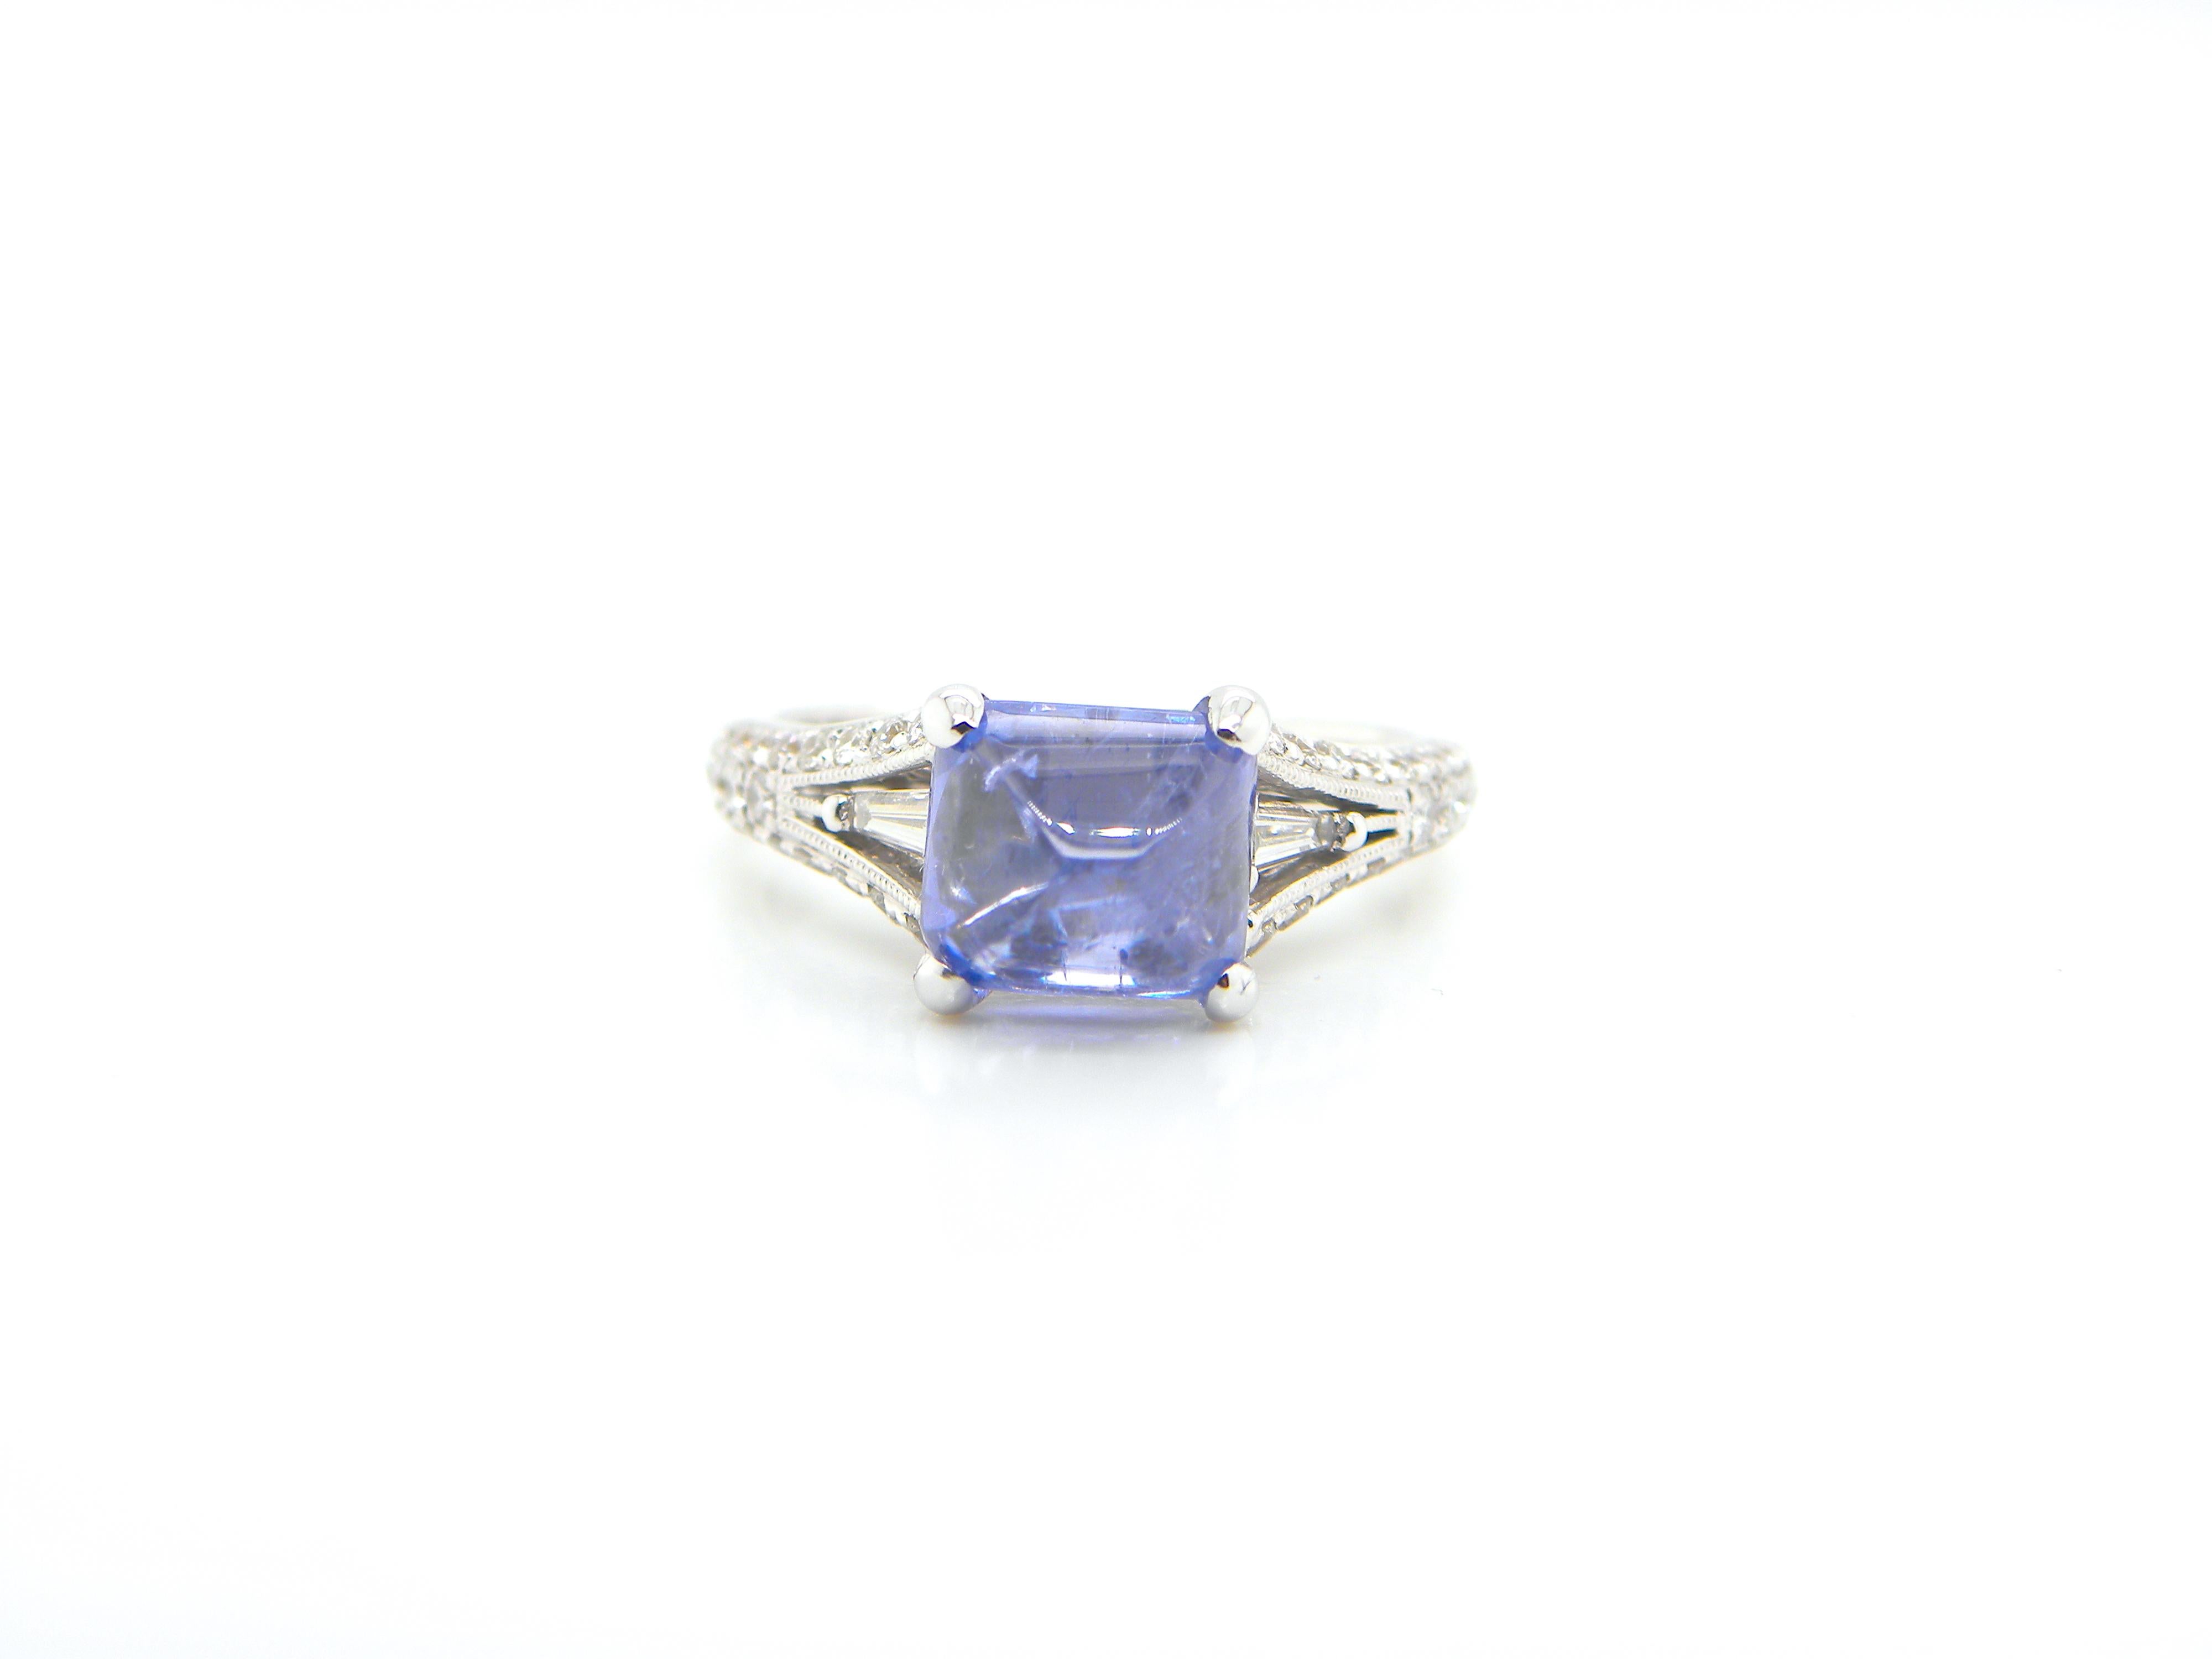 3.17 Carat GIA Certified Burma No Heat Colour Change Sapphire and Diamond Ring:

A playful ring, it features a beautiful GIA certified natural unheated Burmese sugarloaf colour-change blue sapphire weighing 3.17 carat flanked by a flurry of white